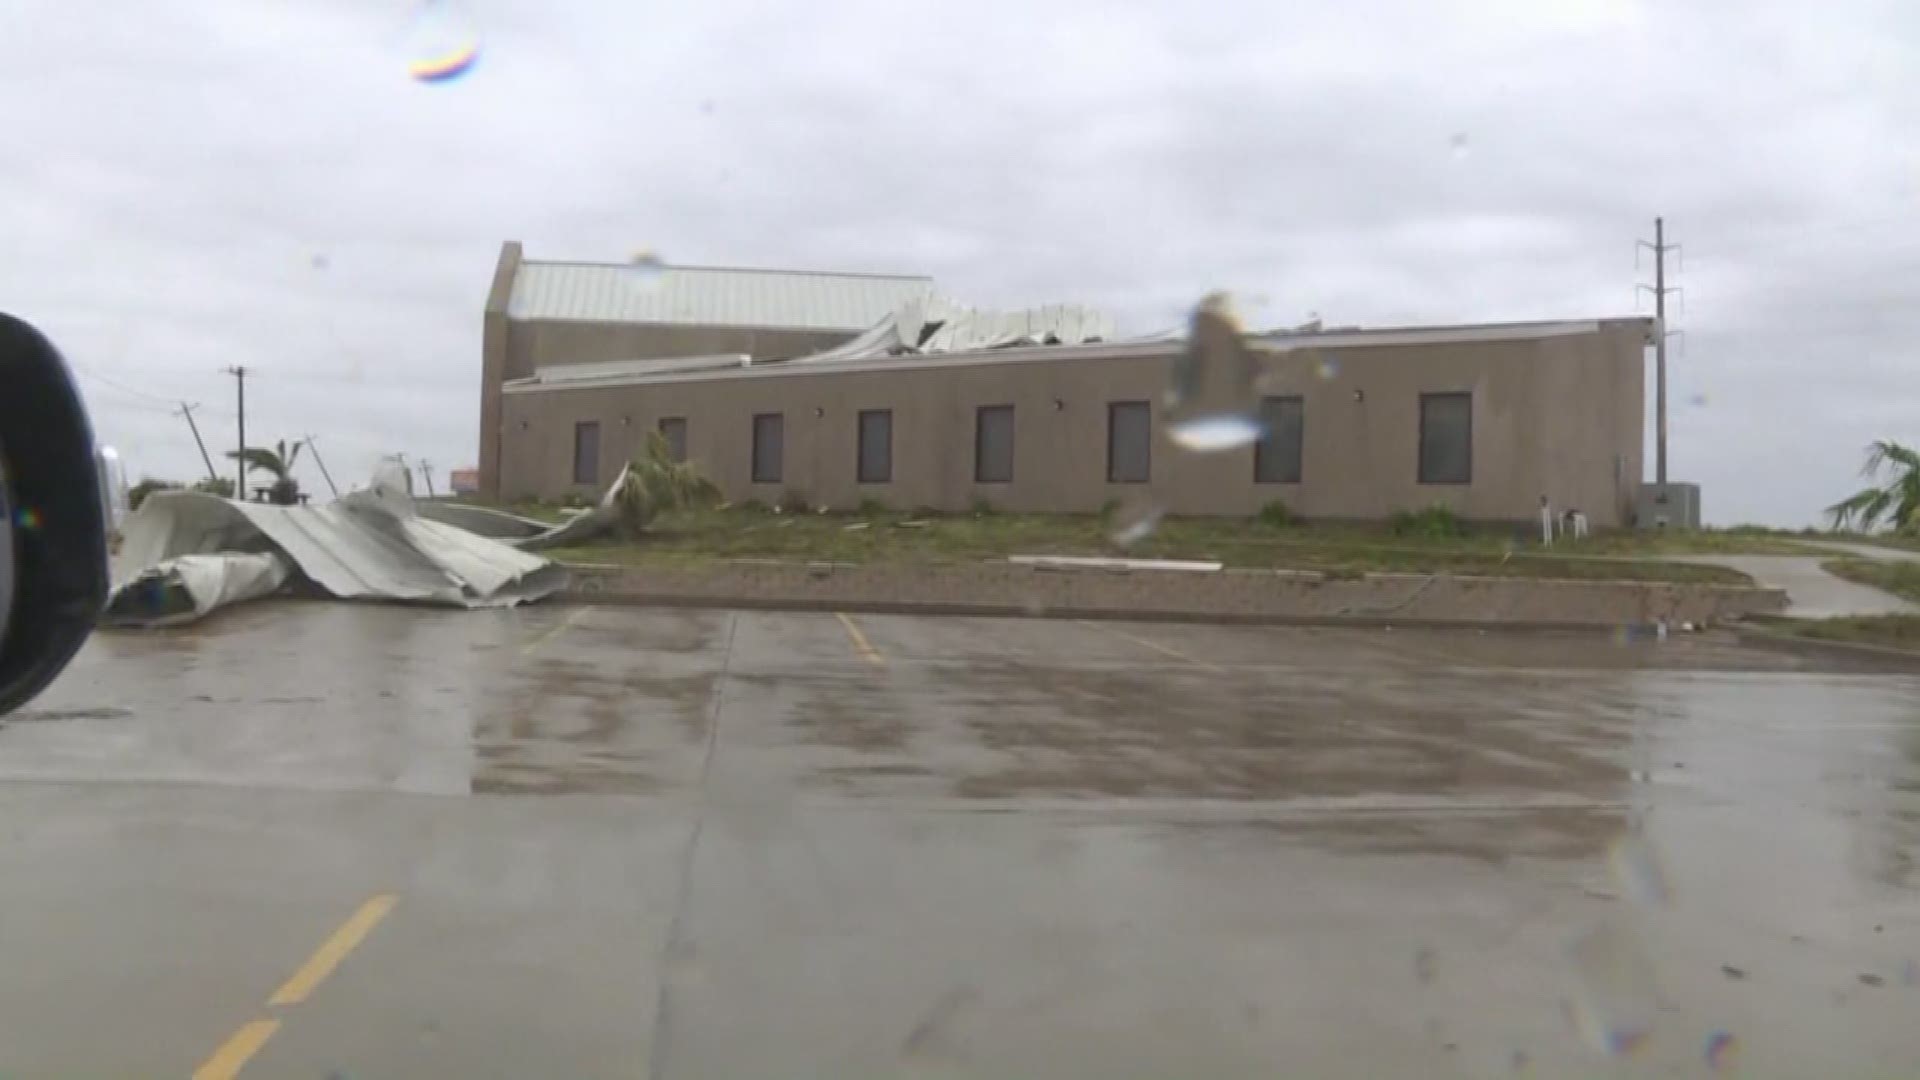 After Hurricane Harvey made landfall, parts of the roof of the Island In the Son church near Mustang Island wound up in the parking lot. (8/26 8:30 am) 